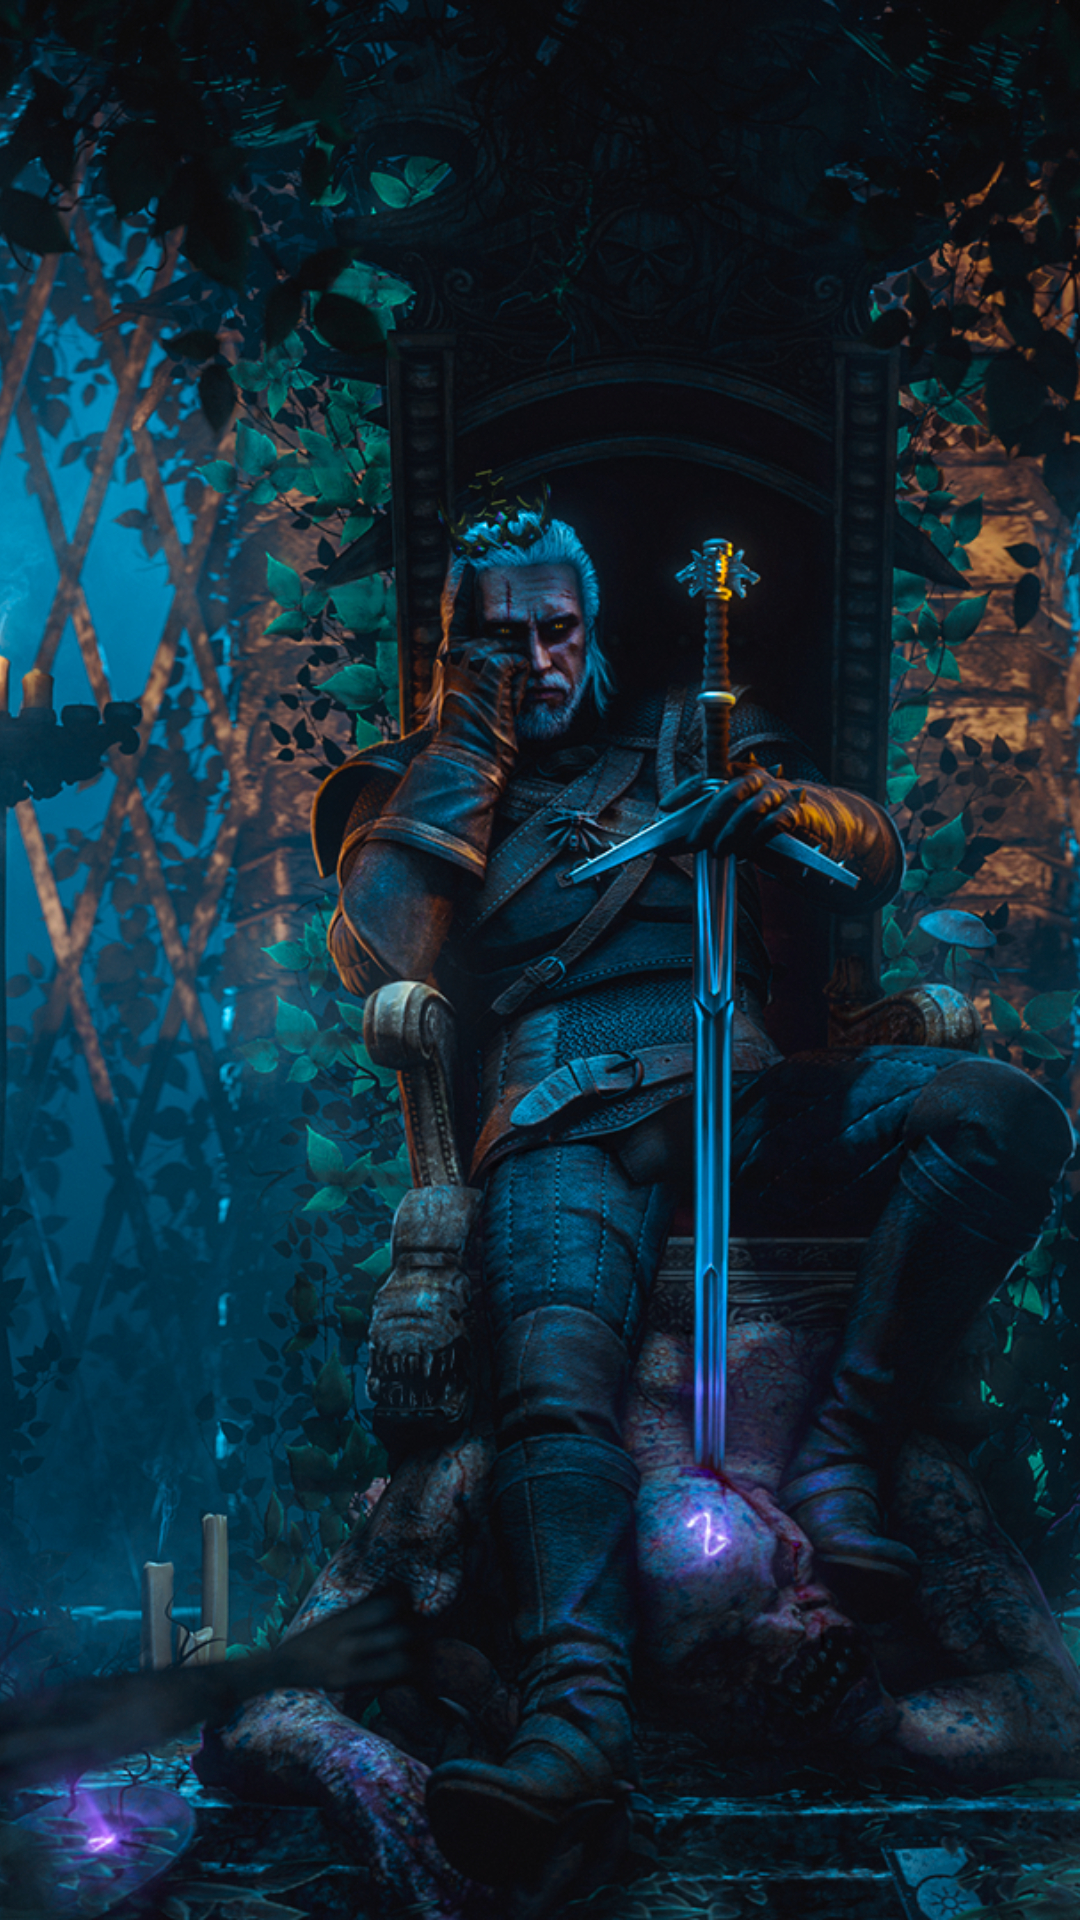 1080x1920 The Witcher 3 Wallpapers [Desktop,iPhone,Laptop,Android